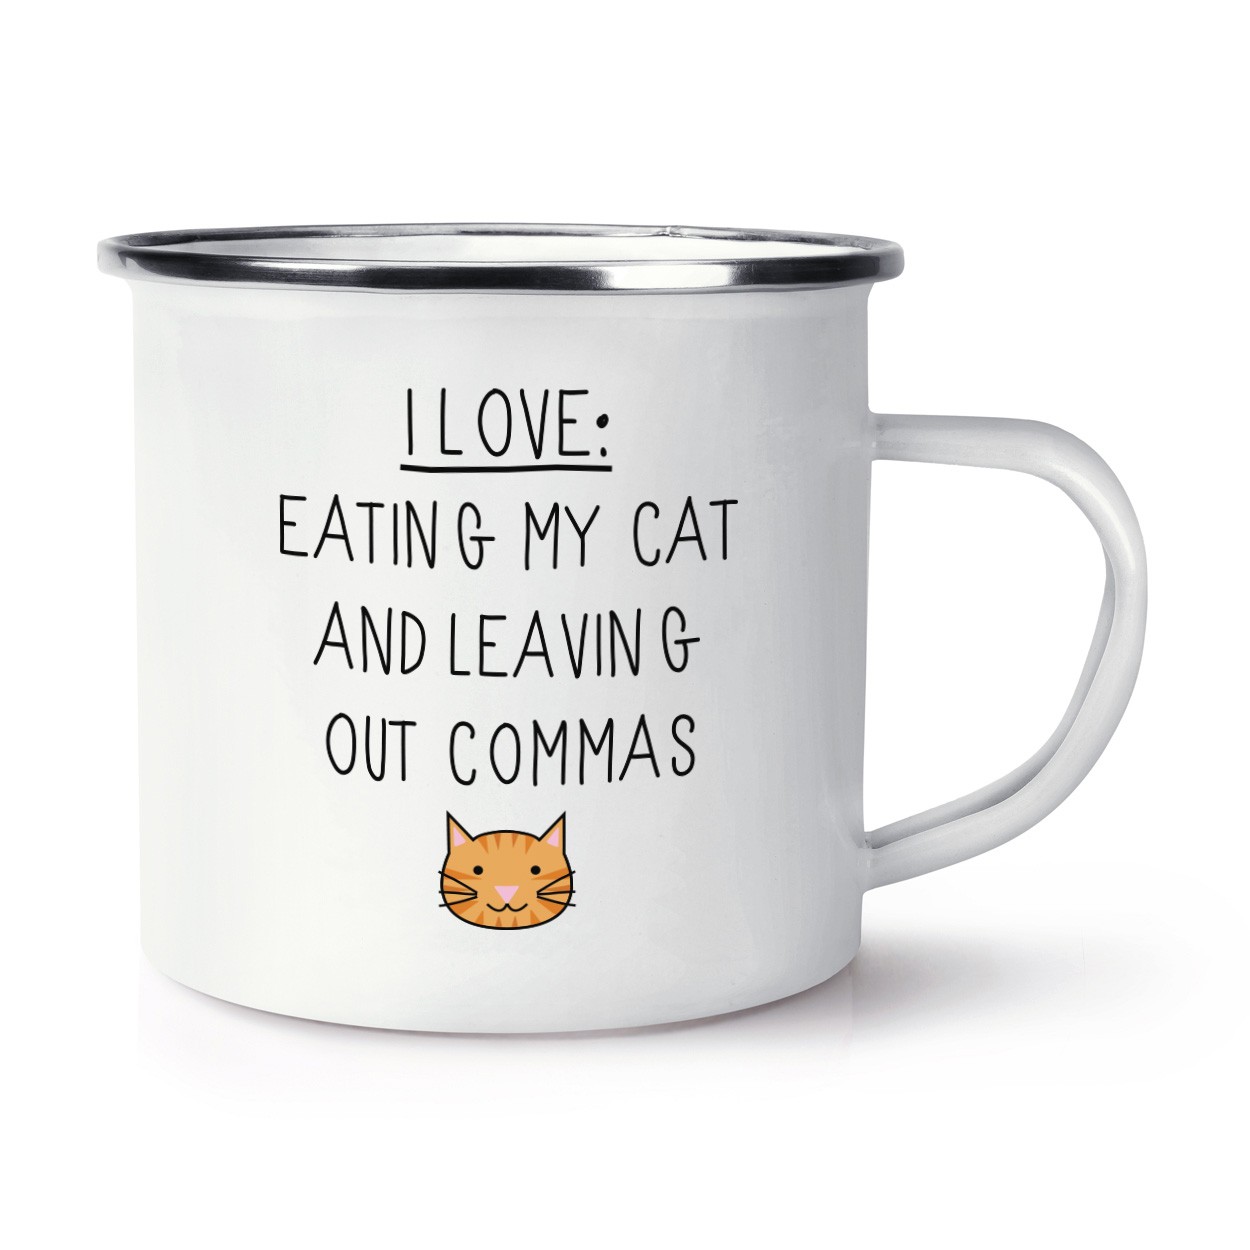 I Love Eating My Cat and Leaving Out Commas Retro Enamel Mug Cup